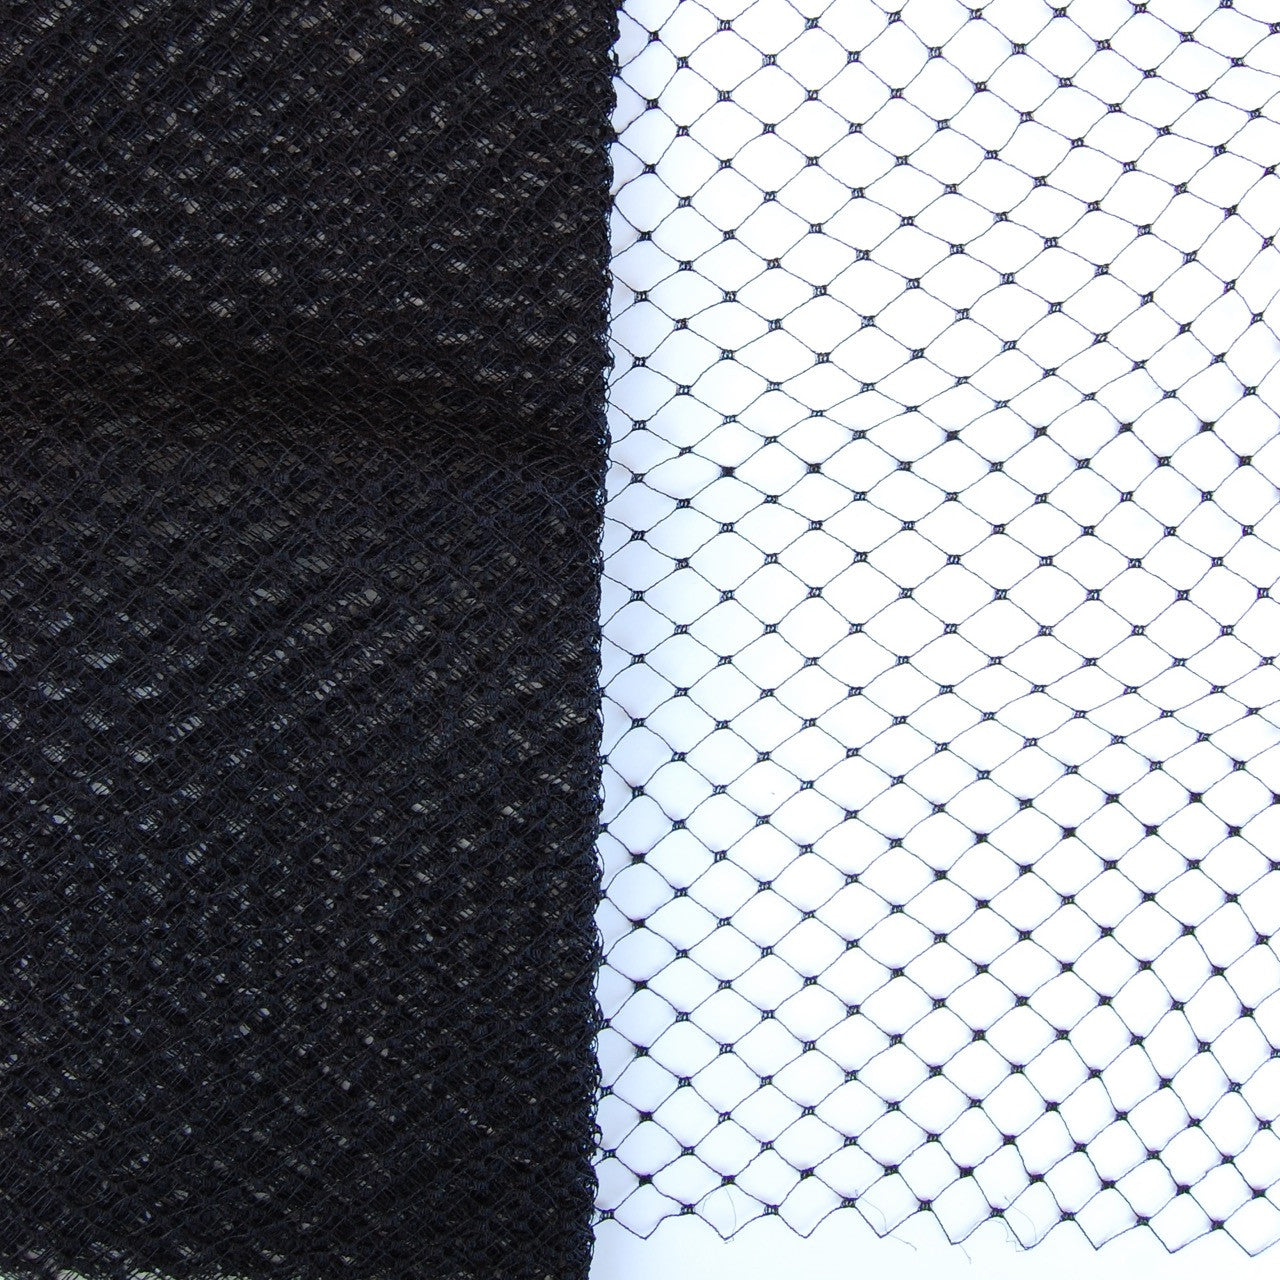 Chunky Square in Diamond Weave Veiling Netting - Birdcage Many Colors